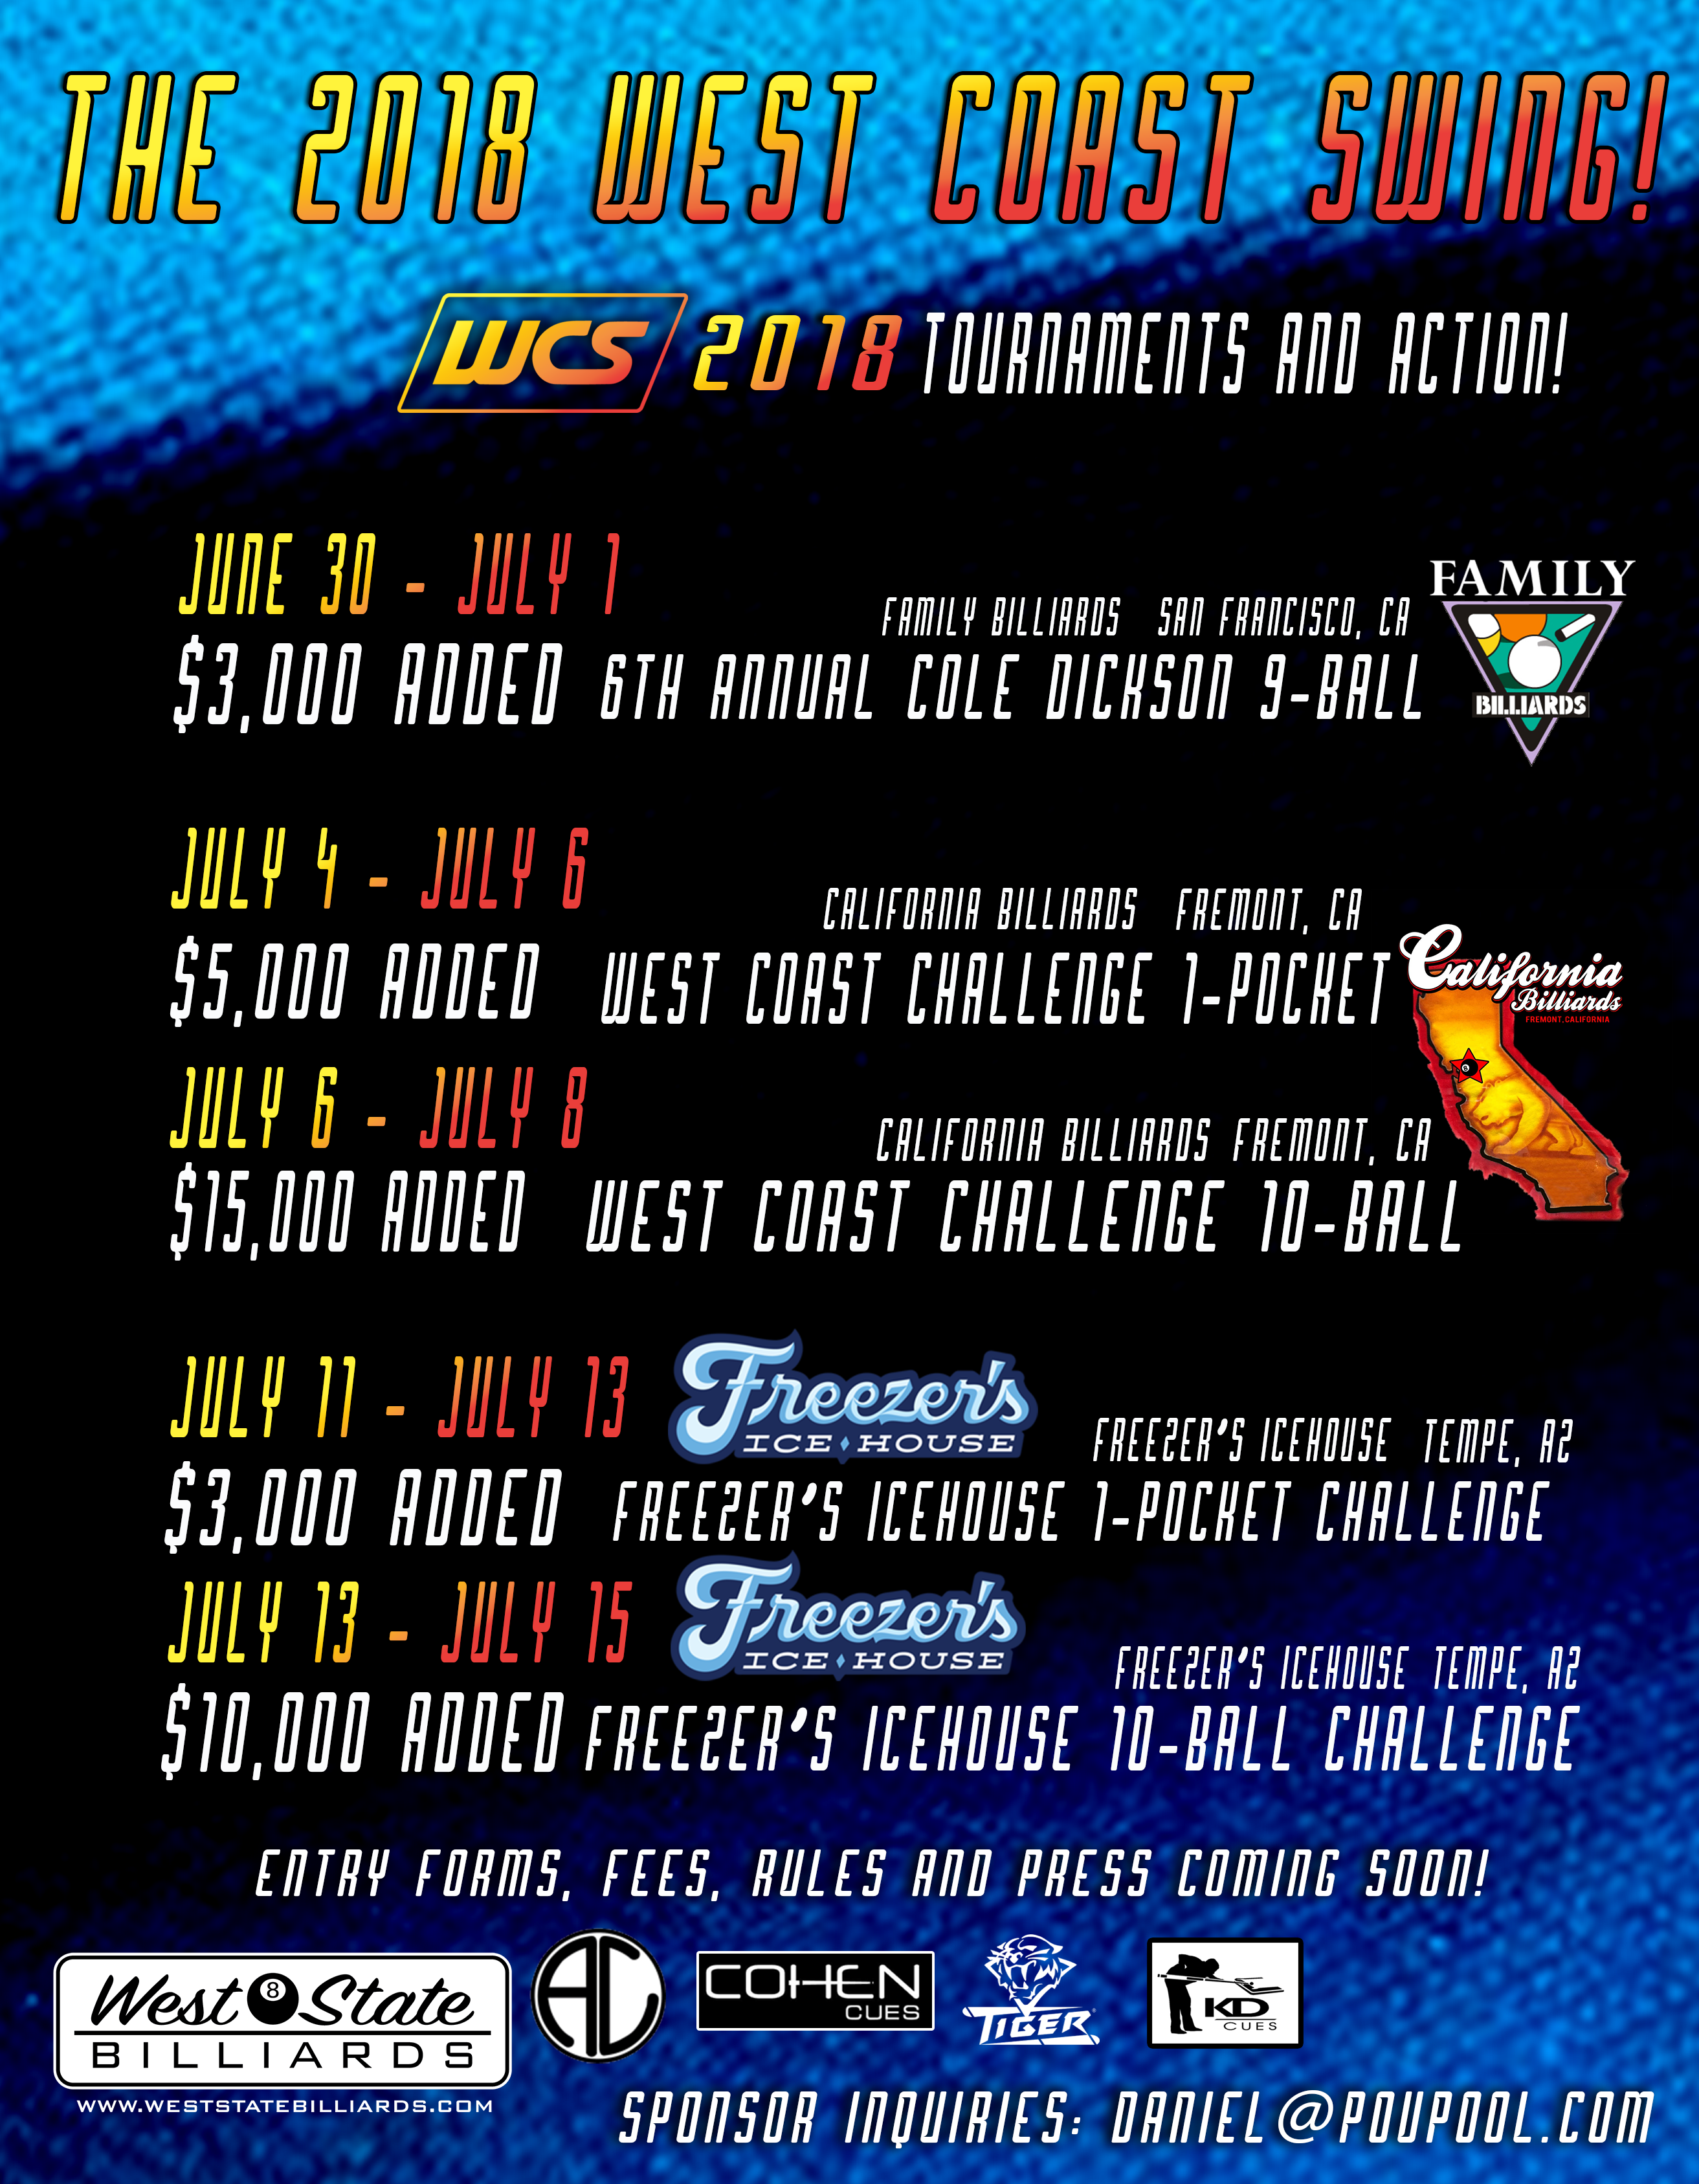 The 2018 West Coast Swing Of Pool Tournaments And Action: Dates And Venues!